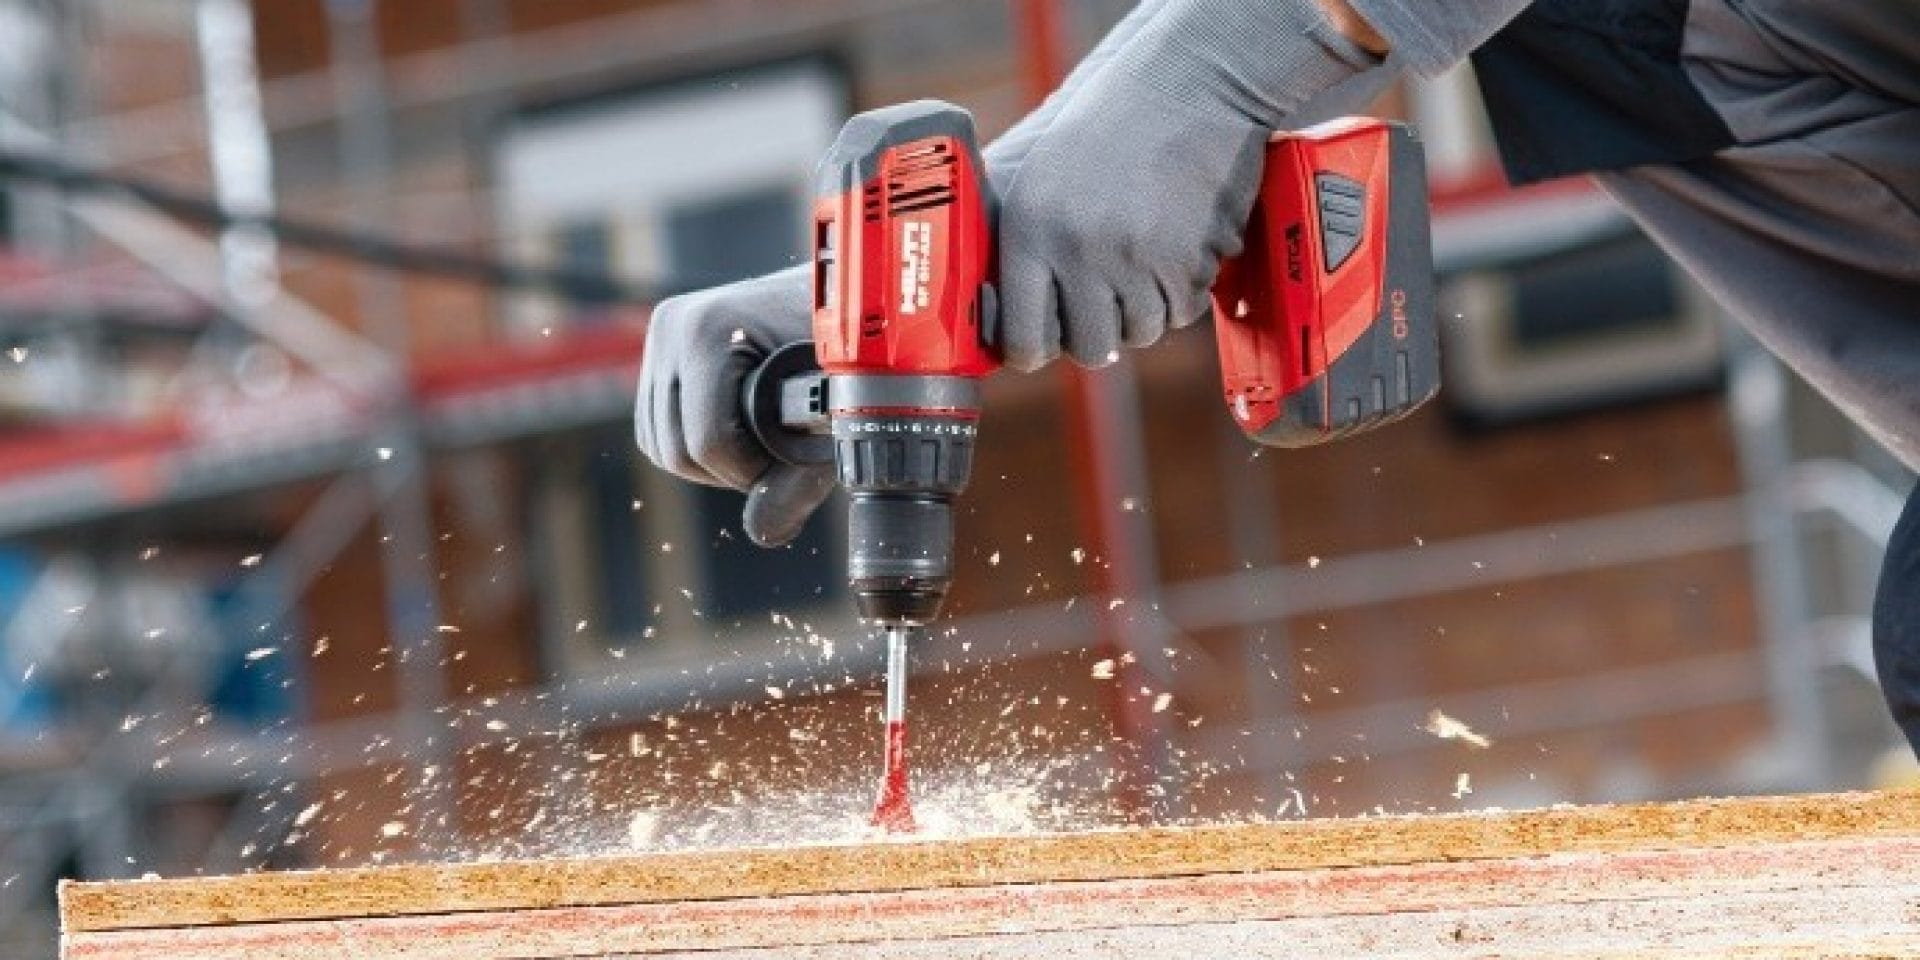 Long lasting batteries make cordless tools an integral part of every jobsite